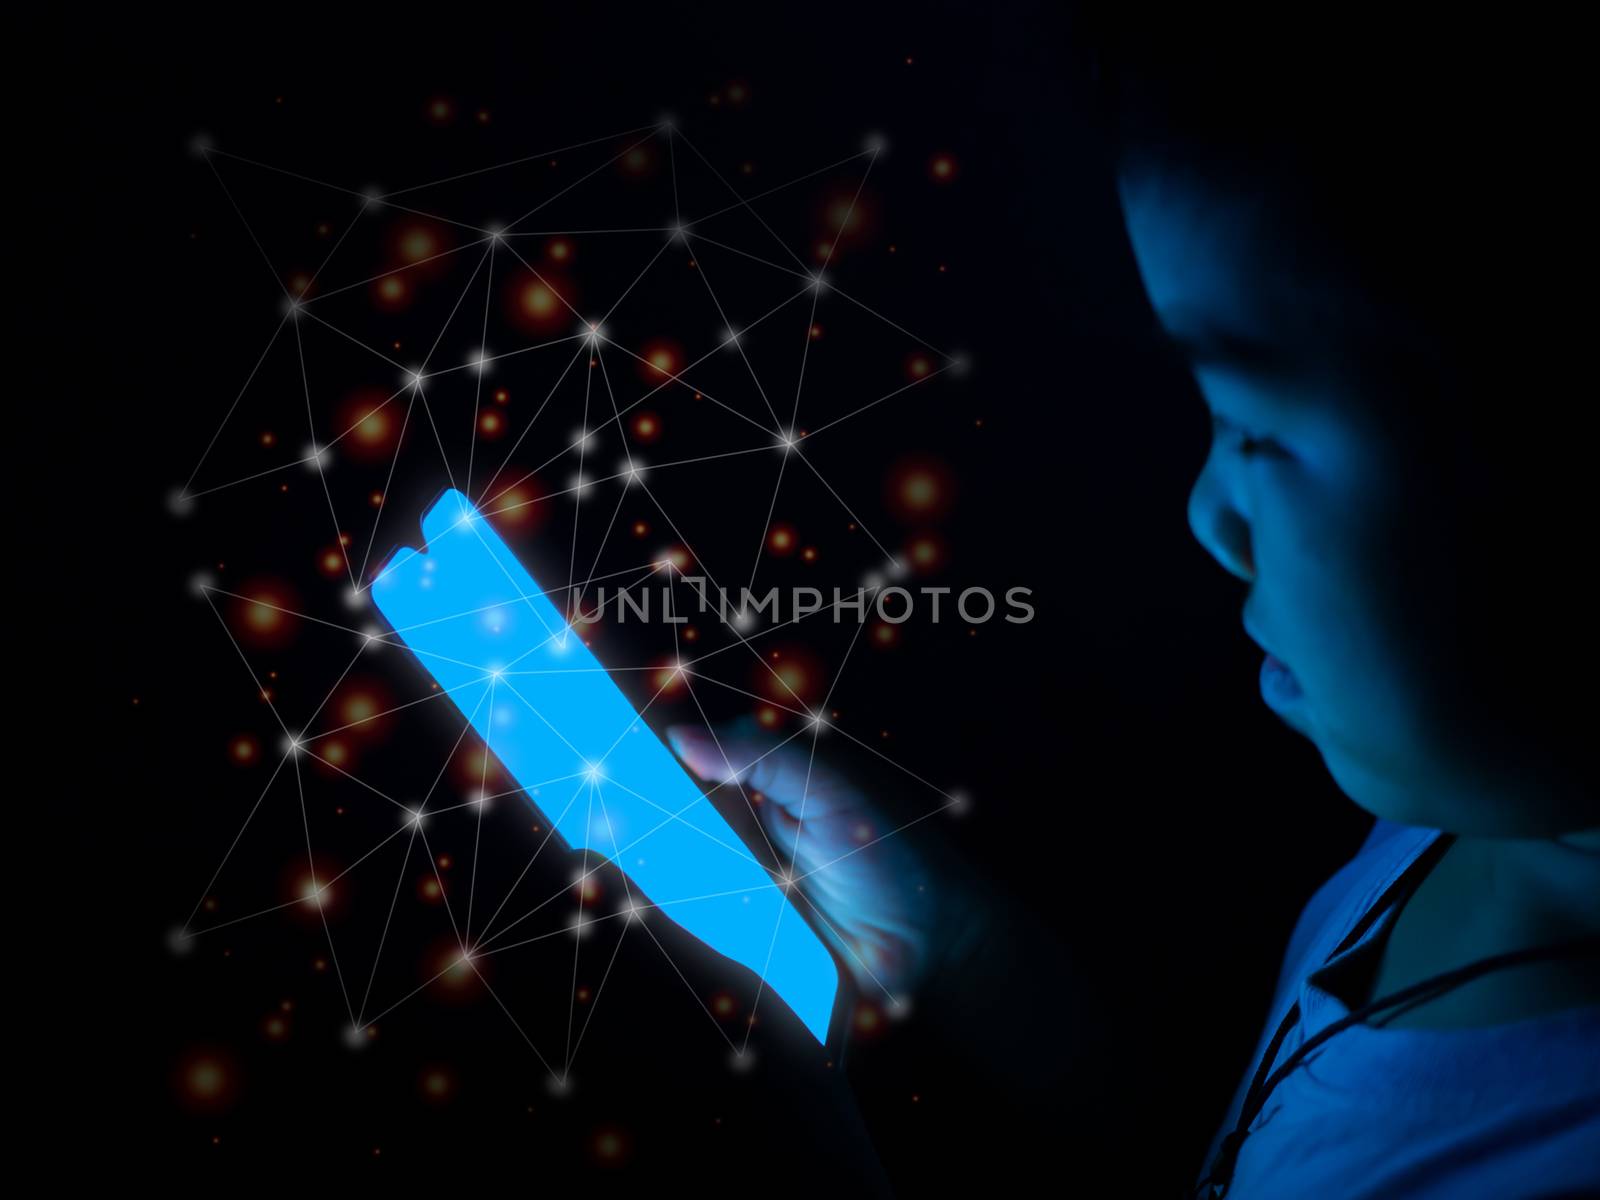 Boy holding the phone screen blank And there is a hologram on the connecting line representing digital communication. internet and communication concept of social media.